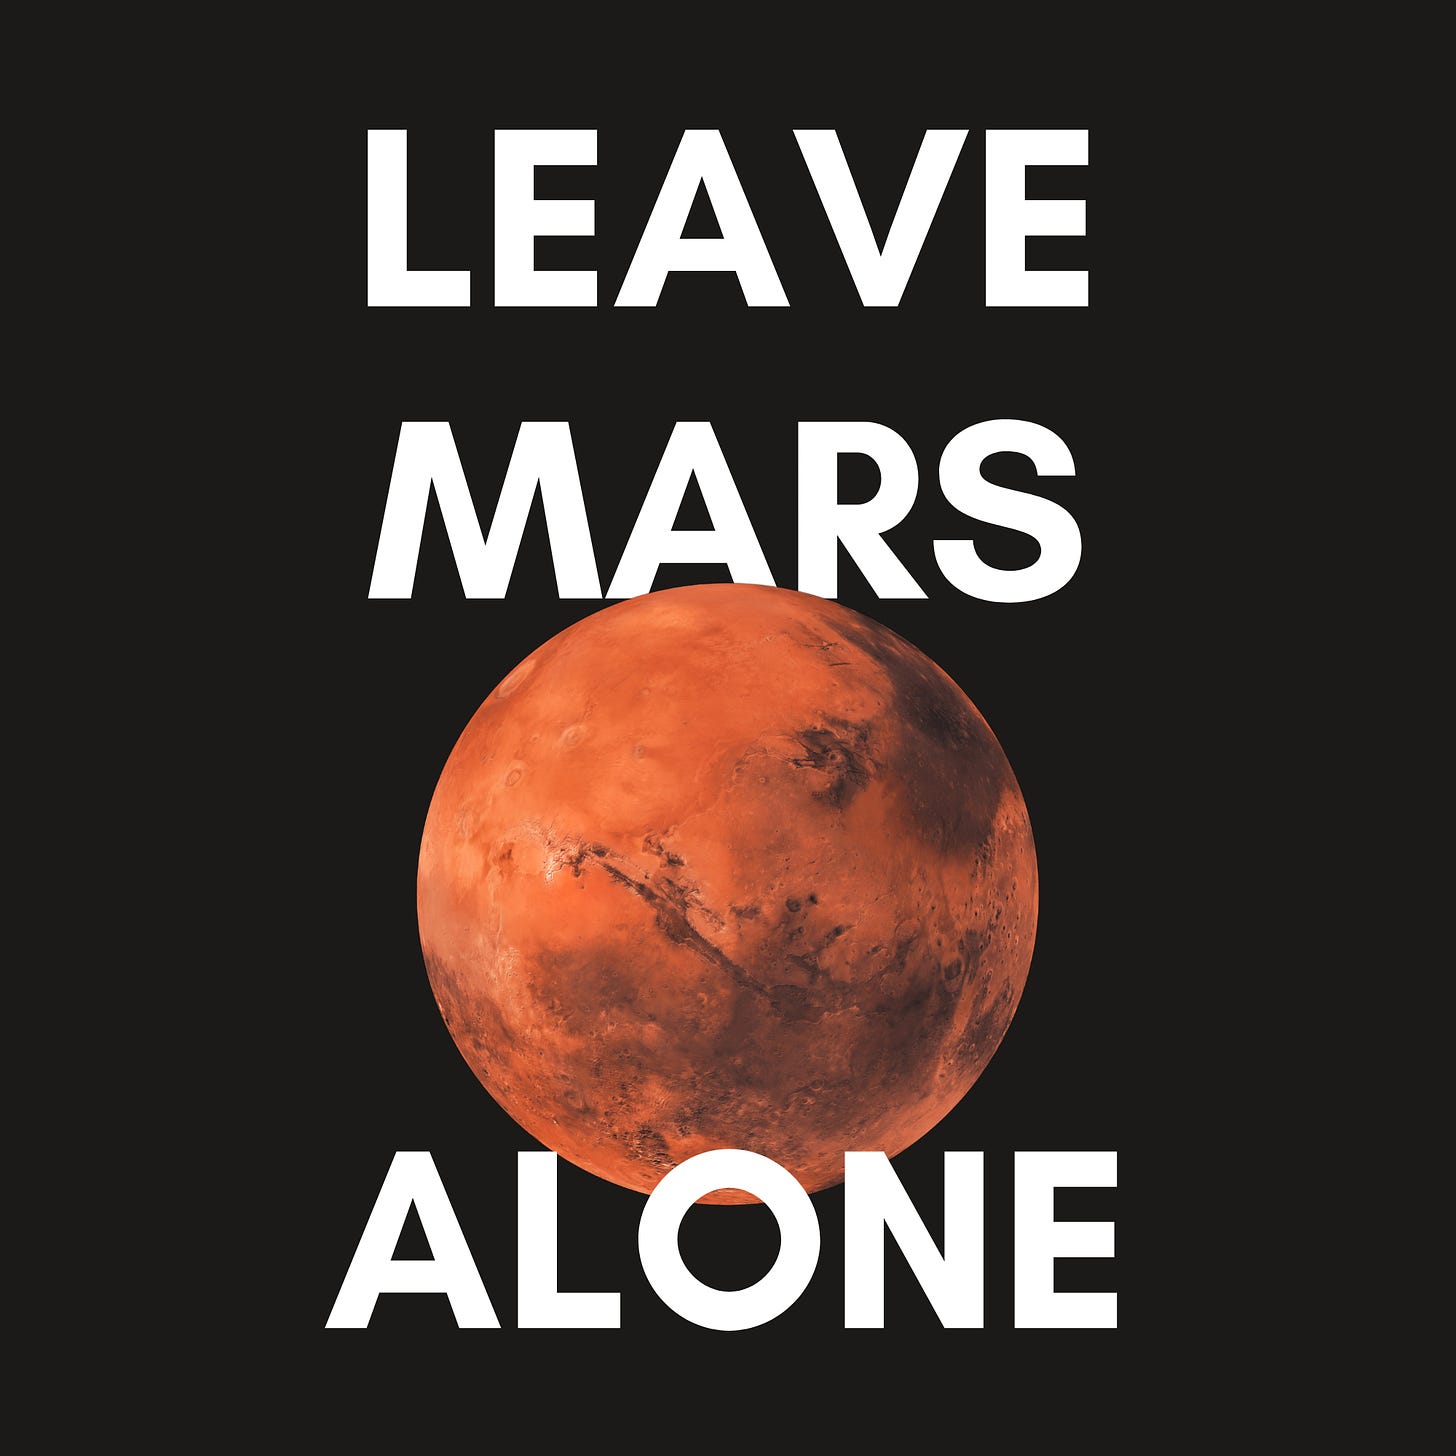 Square black sticker with white writing that reads "LEAVE MARS ALONE" with a photo of Mars in the middle.